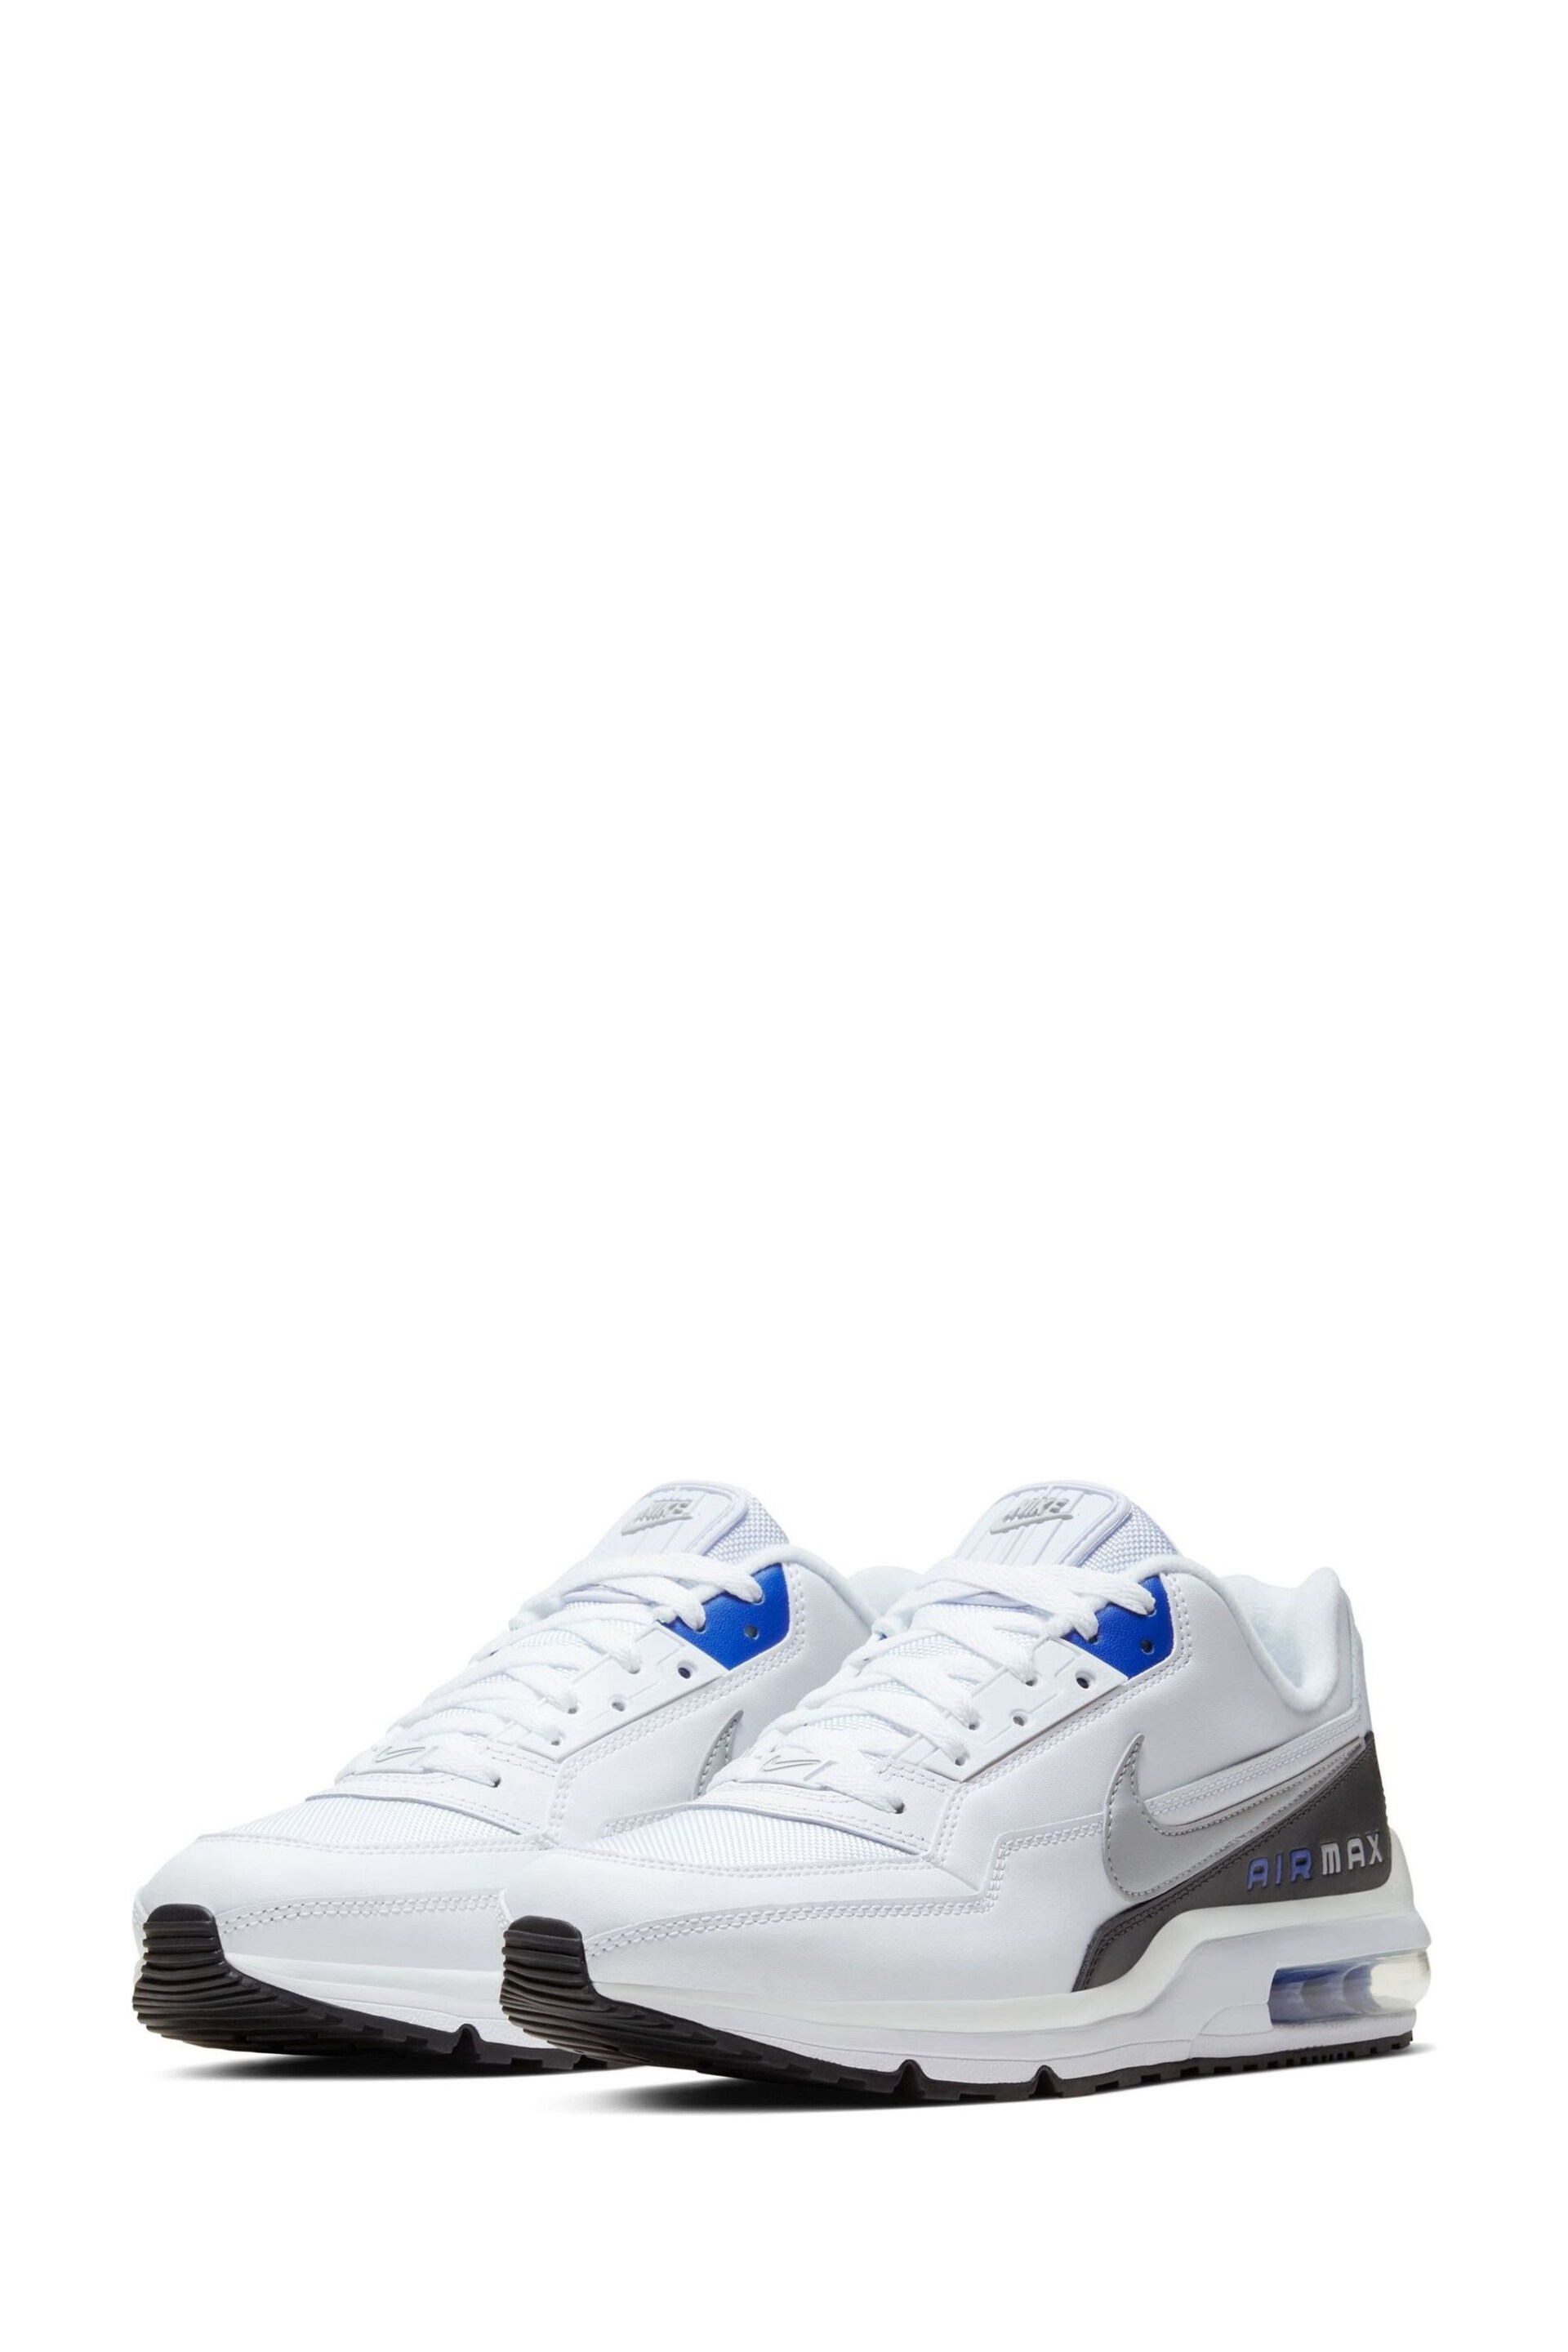 Nike White/Blue Air Max LTD 3 Trainers - Image 2 of 8